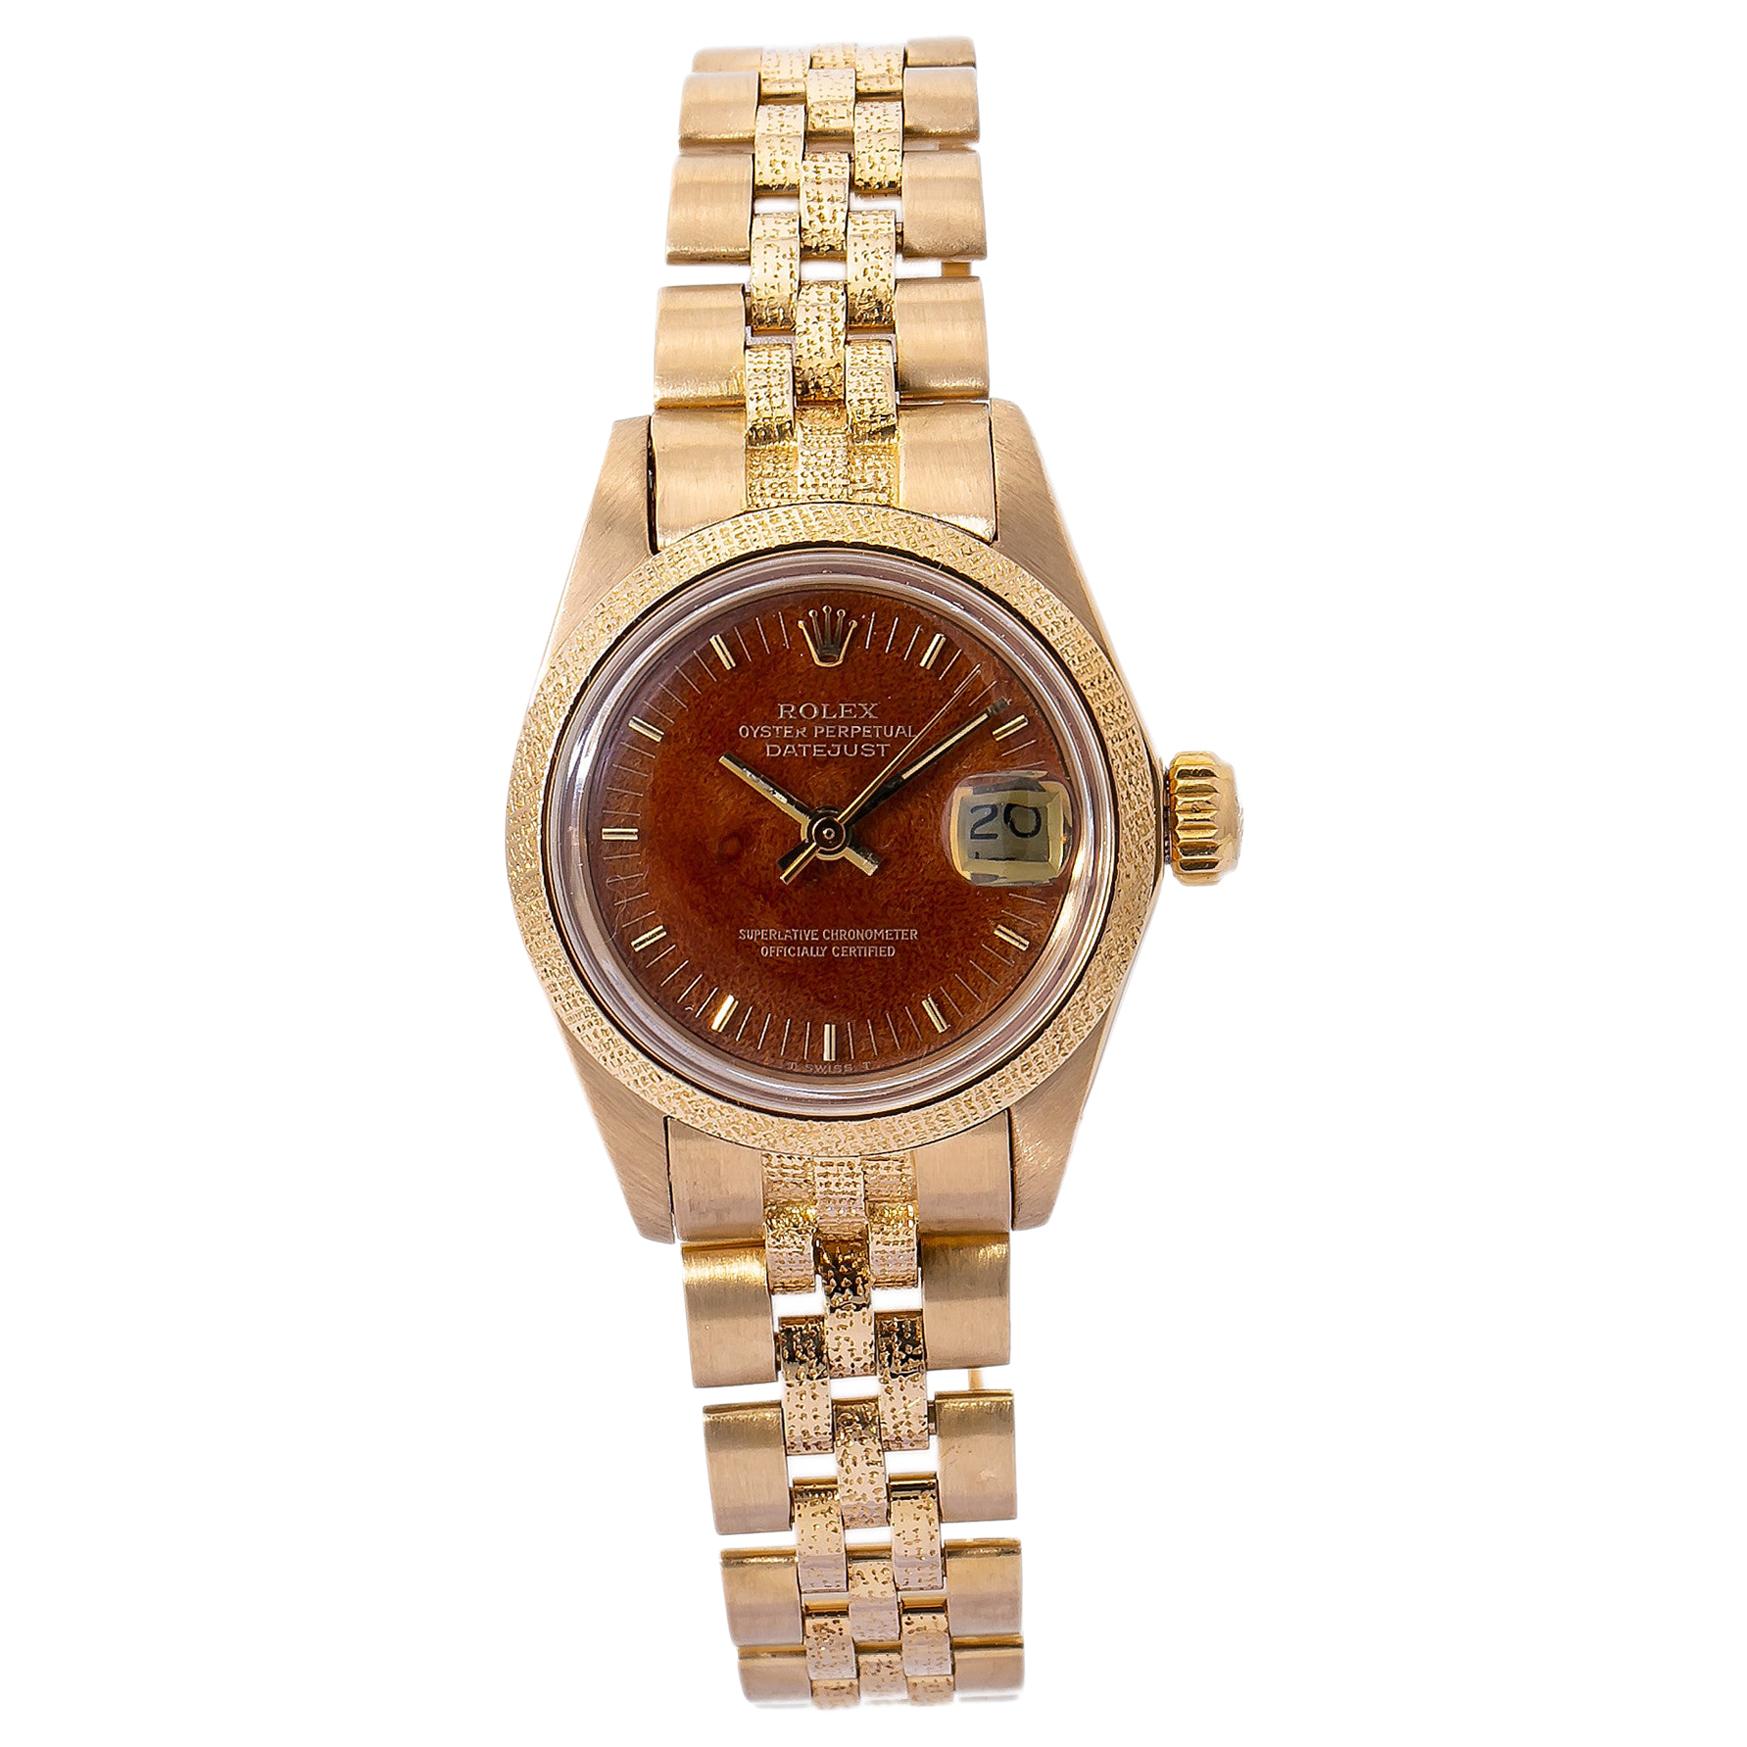 Rolex Datejust 16078, Brown Dial, Certified and Warranty